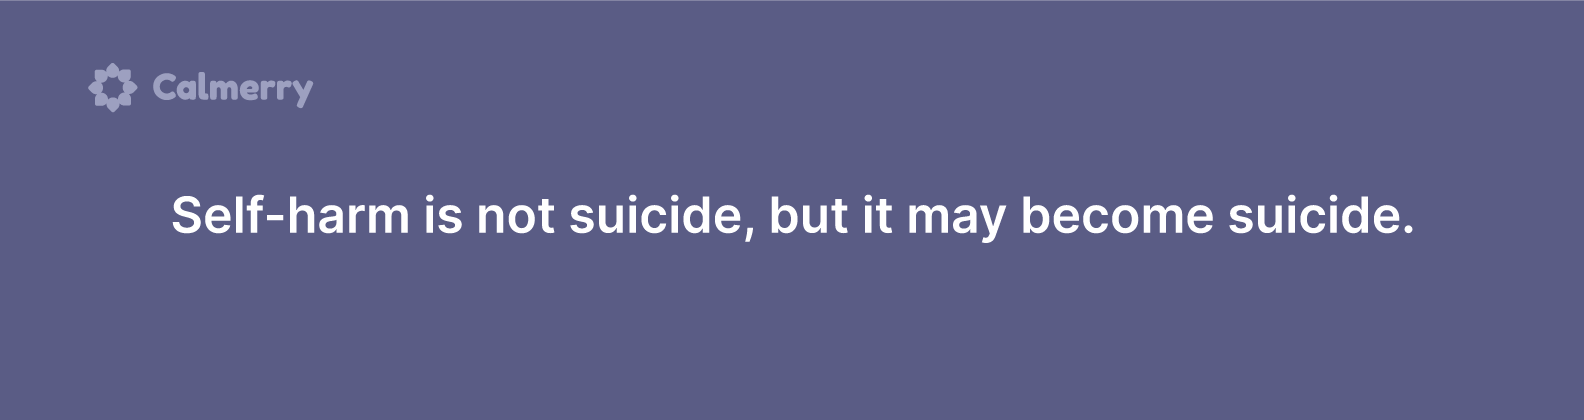 Self-harm is not suicide, but it may become suicide